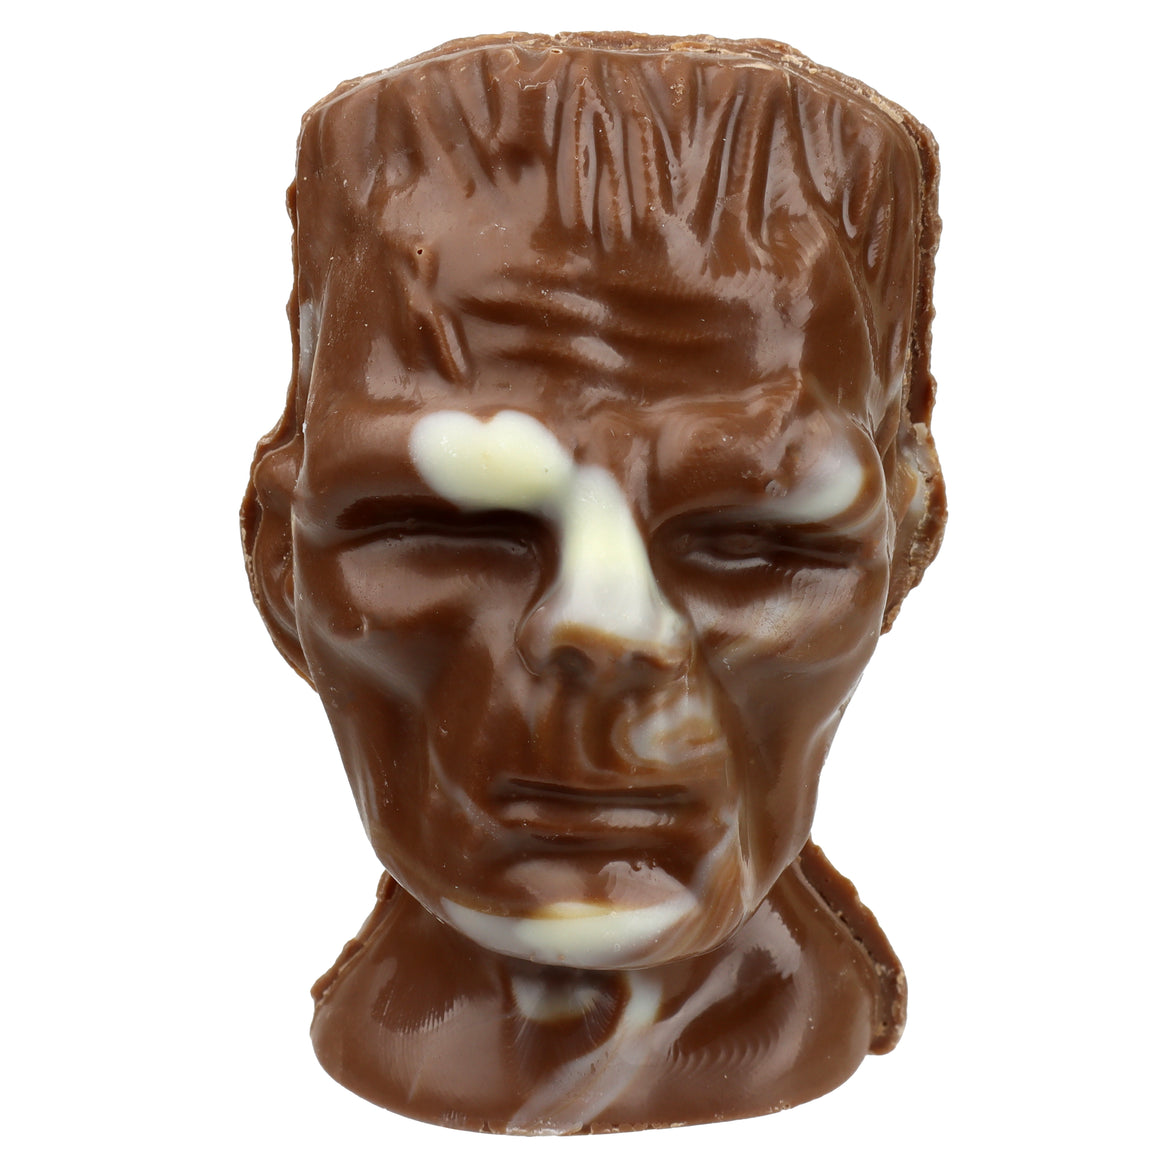 Monster Hot Chocolate Bomb 1.6 oz.  - For fresh candy and great service, visit www.allcitycandy.com